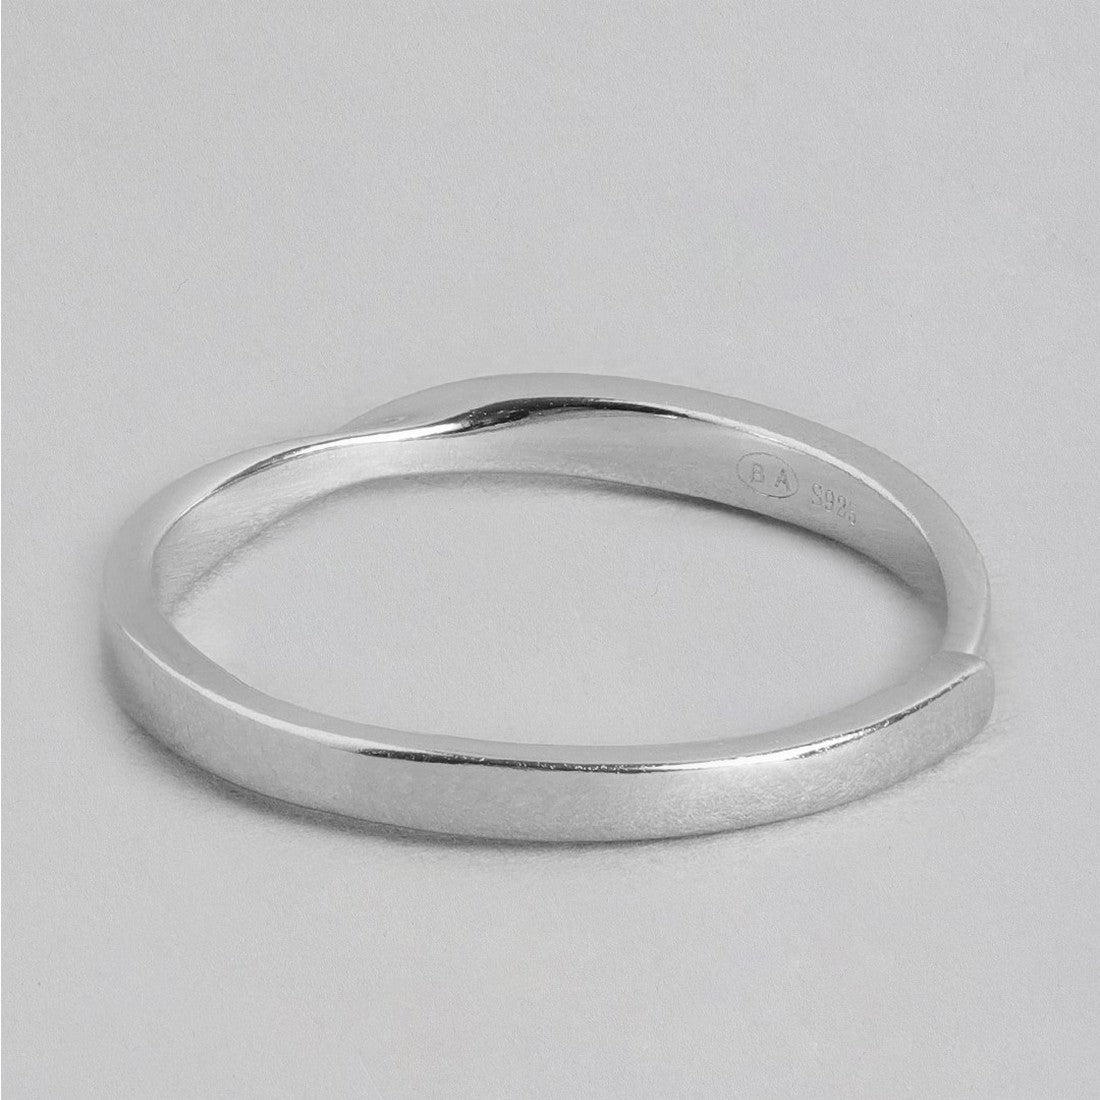 Cut Class Rhodium Plated 925 Sterling Silver Ring For Him (Adjustable)